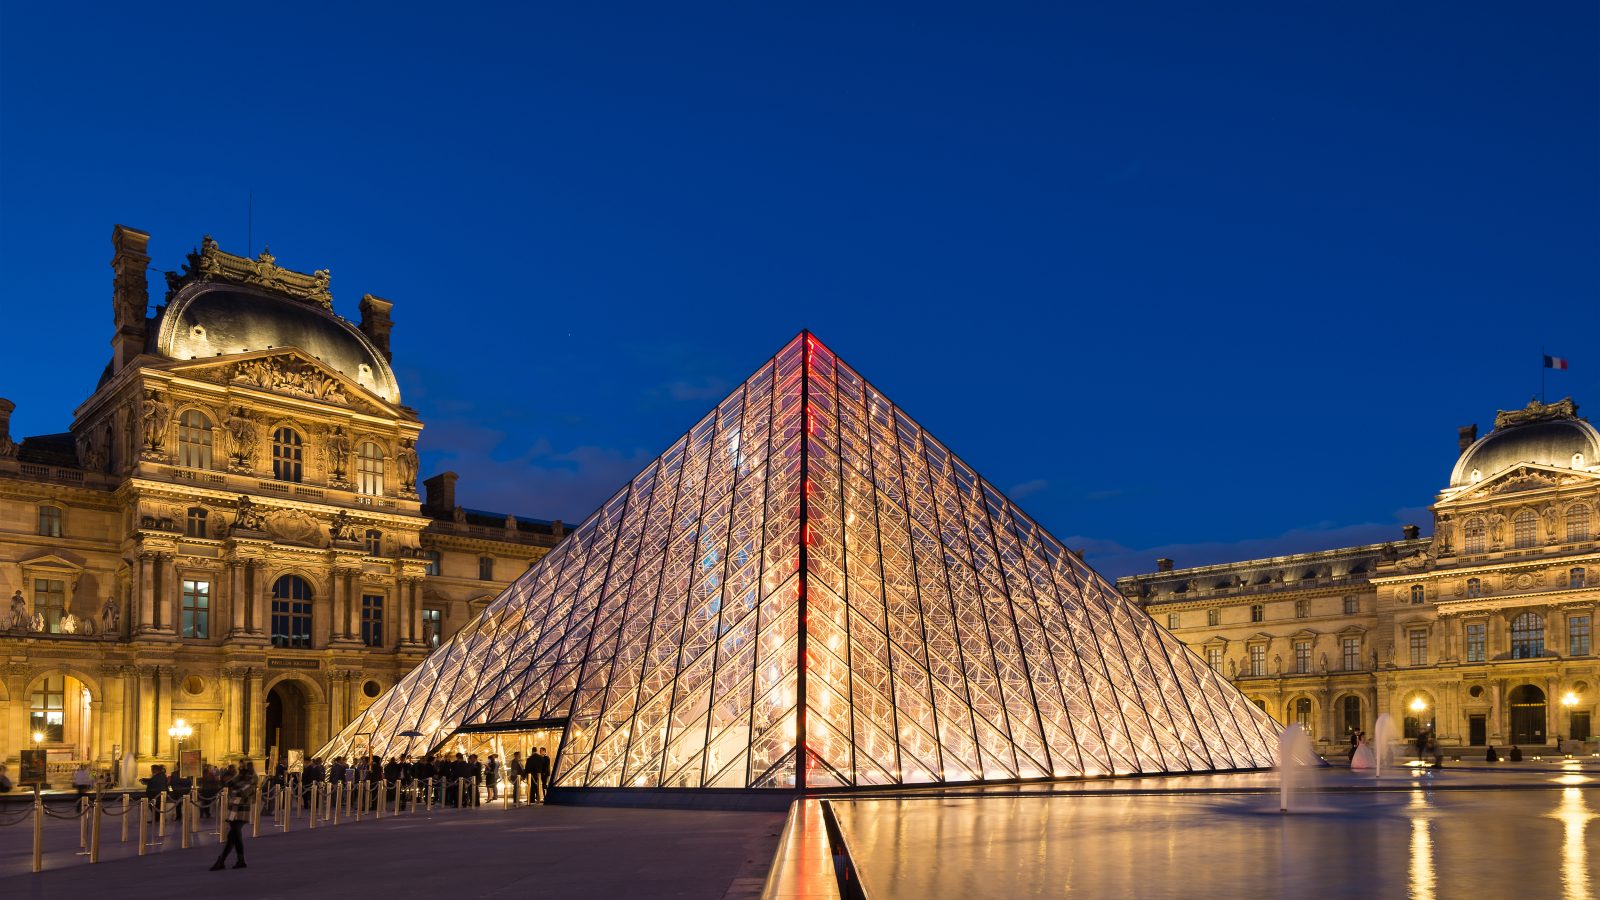 Illuminated glass pyramid with ornate building in background.